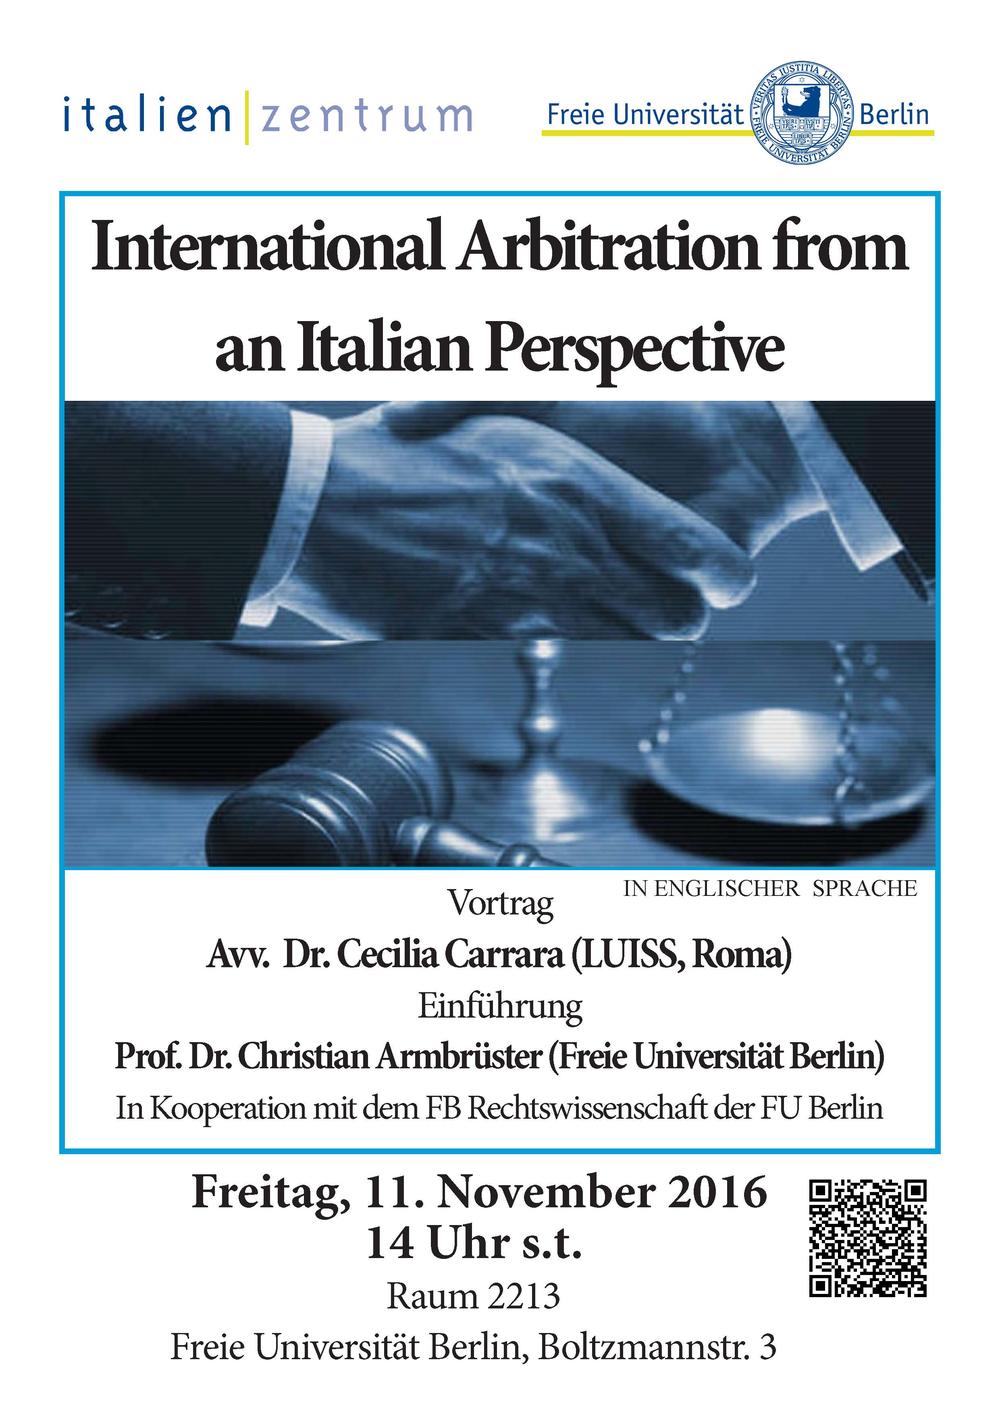 International Arbitration from an Italian Perspective